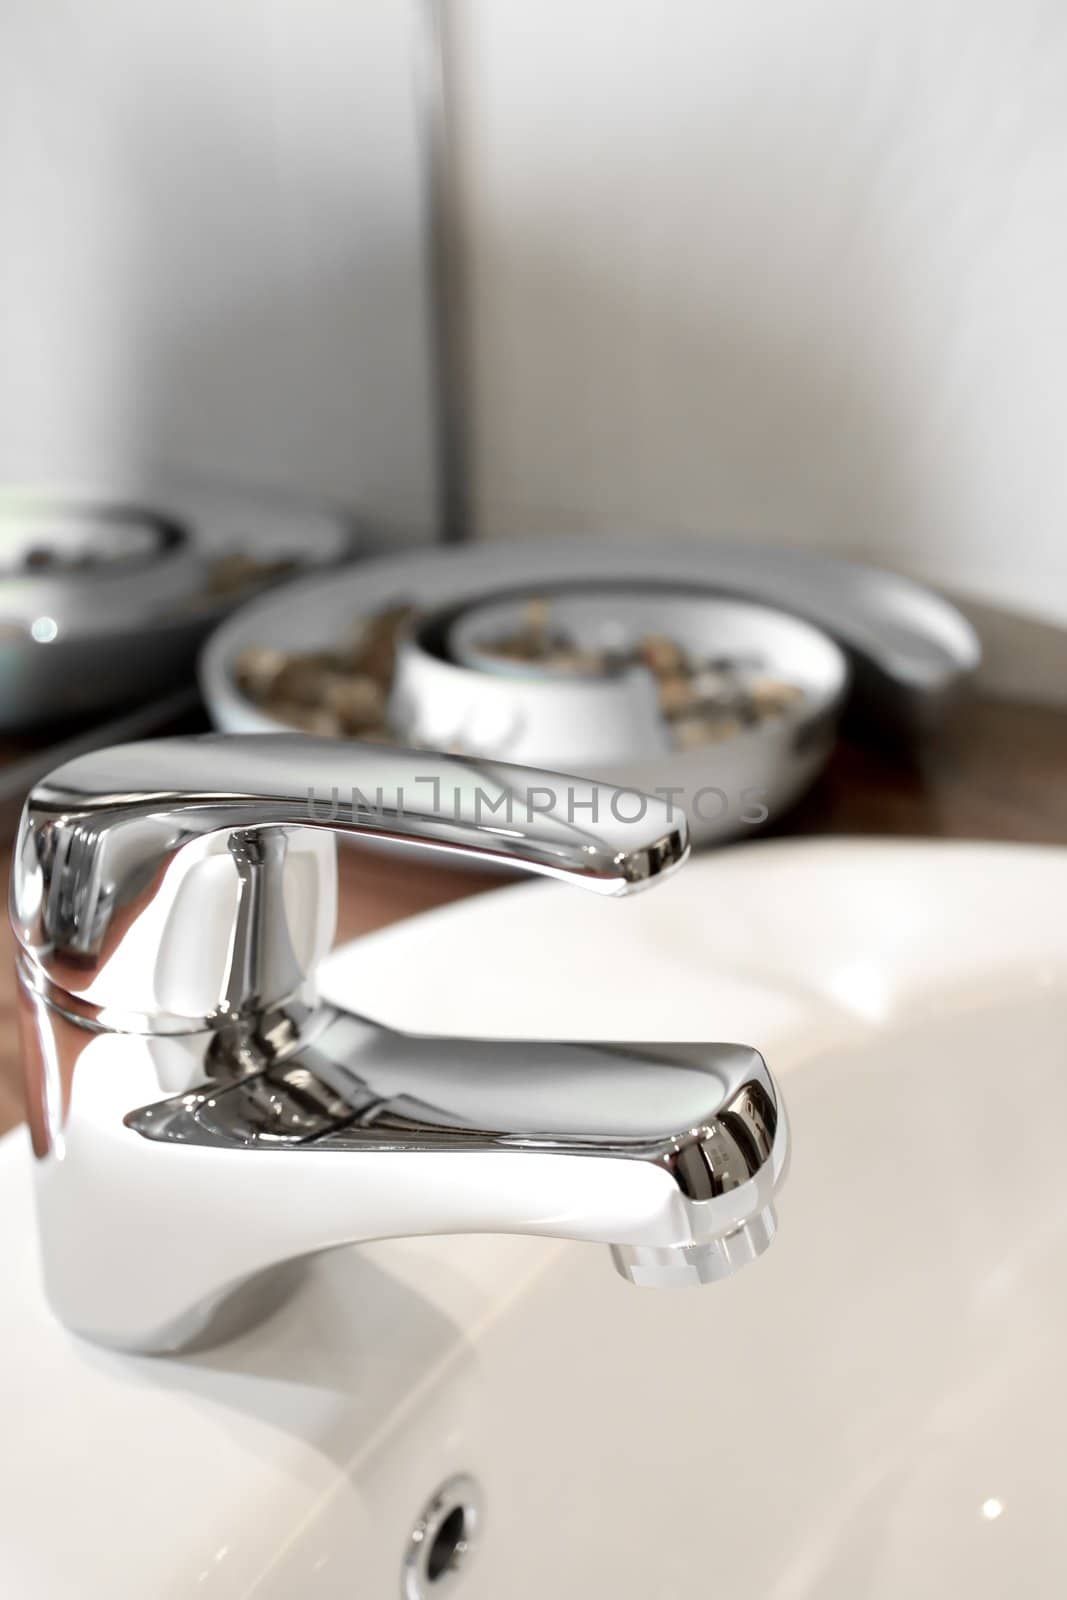 tap of a clean washbasin with ornament on the background